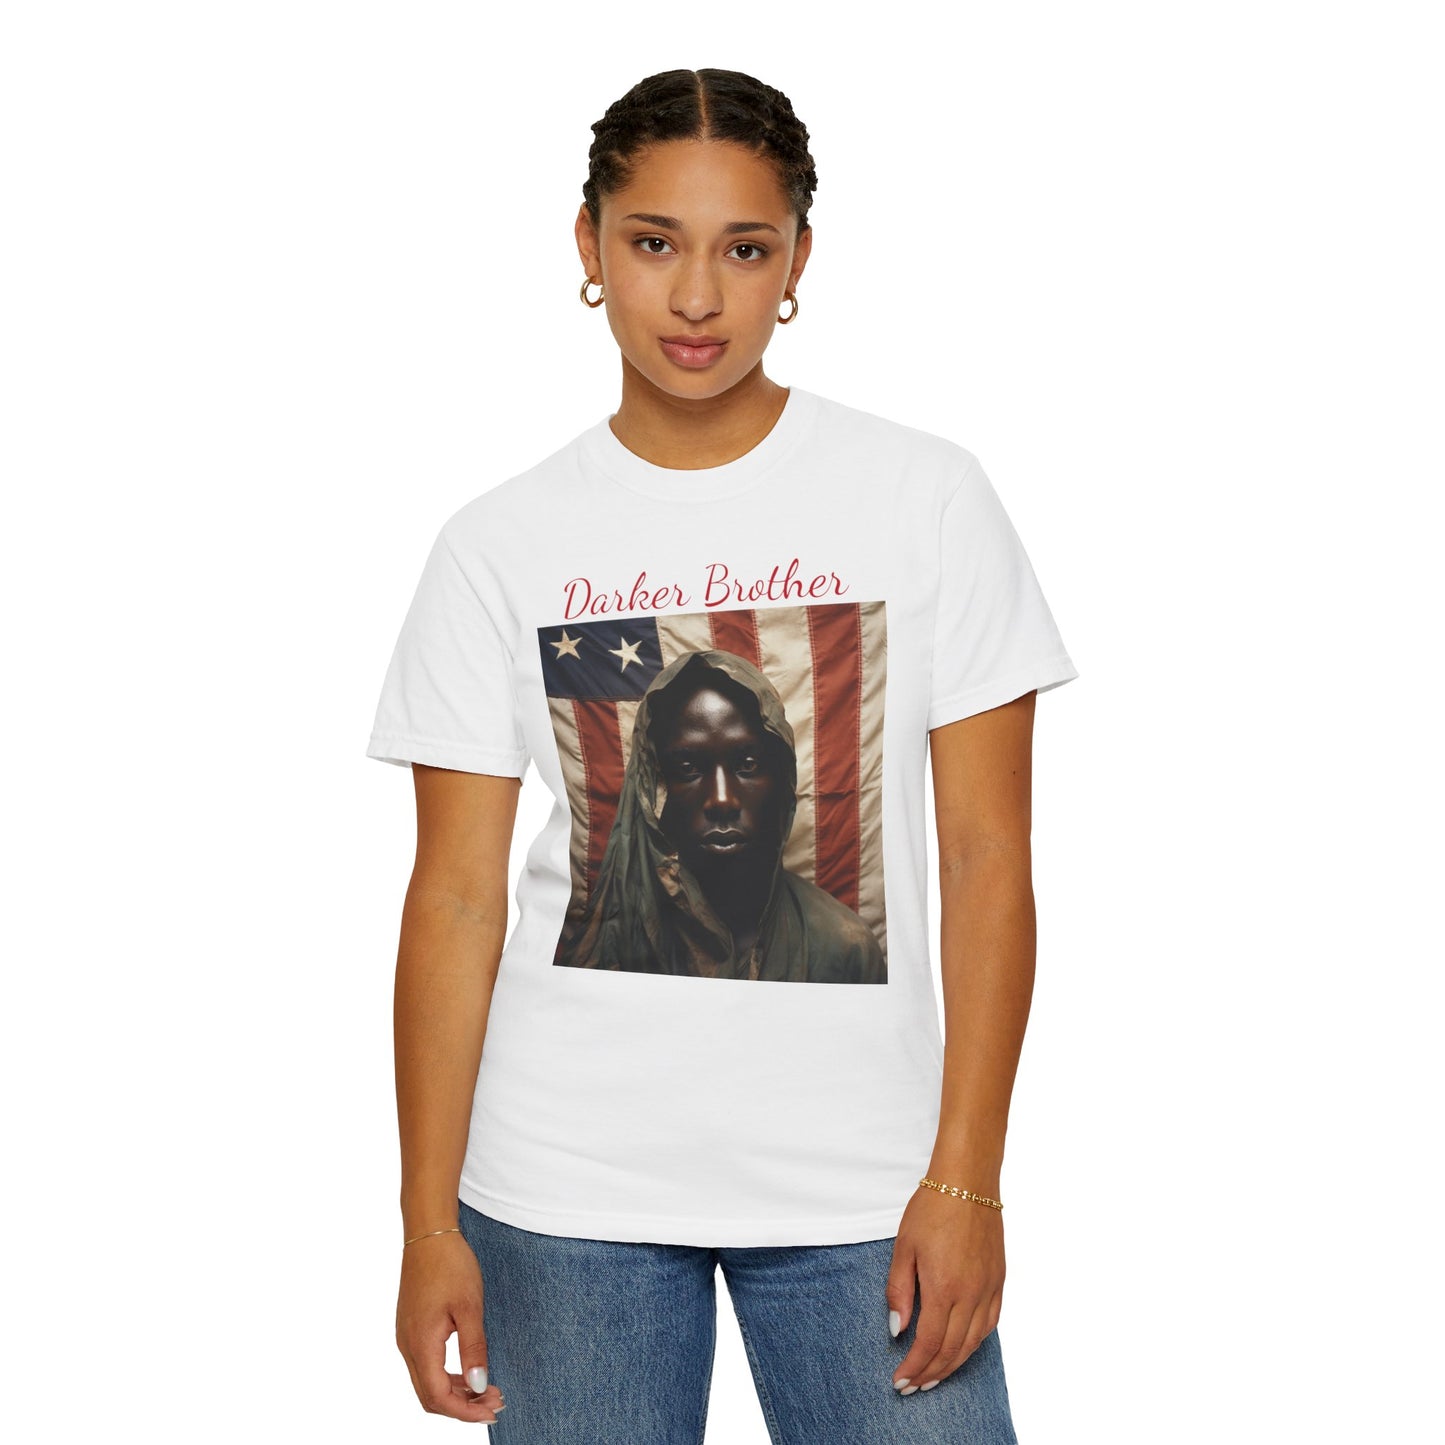 The Darker Brother: Unisex Garment-Dyed T-shirt